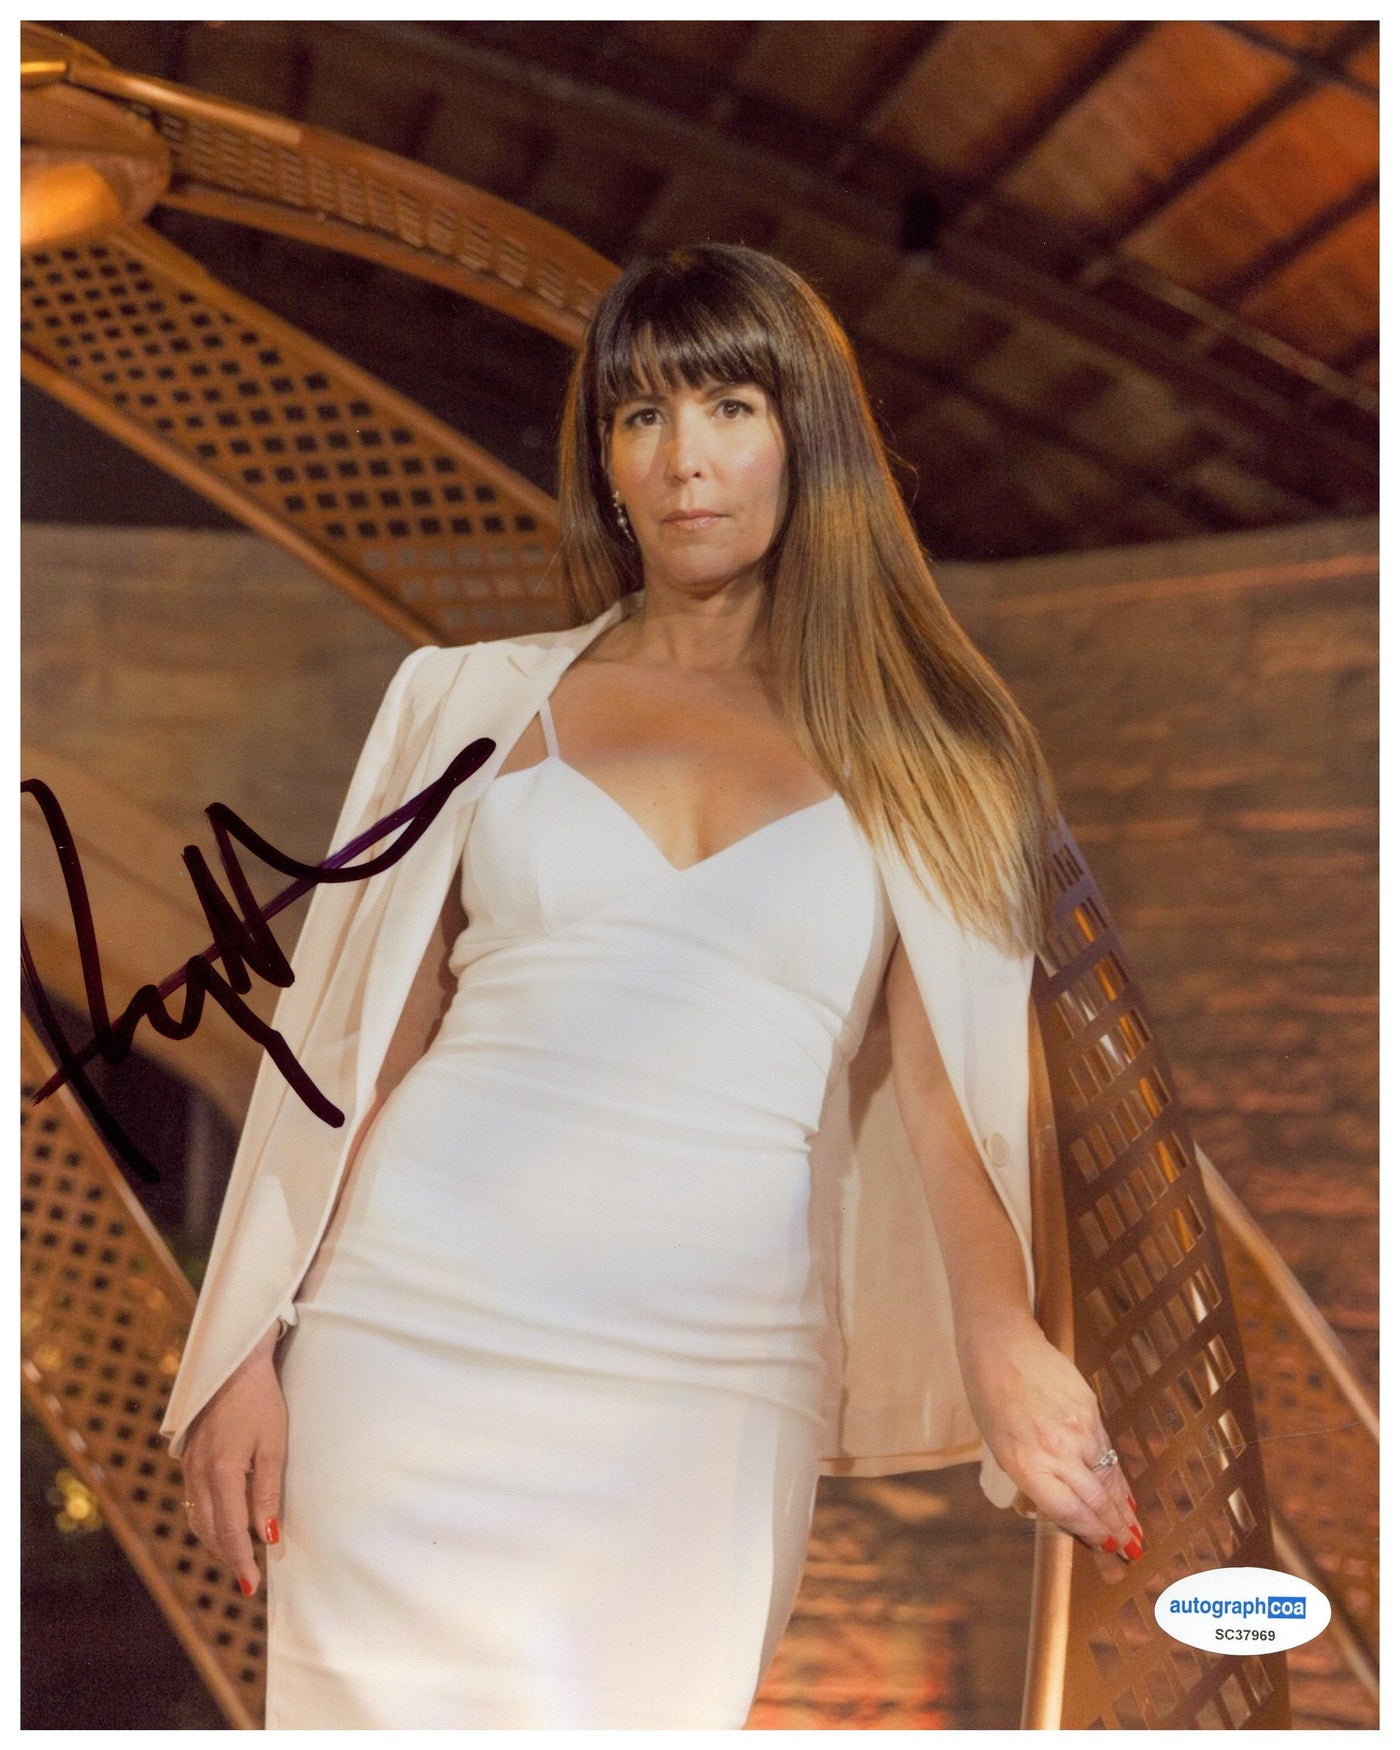 Patty Jenkins Signed 8x10 Photo Director Wonder Woman Authentic Autographed ACOA